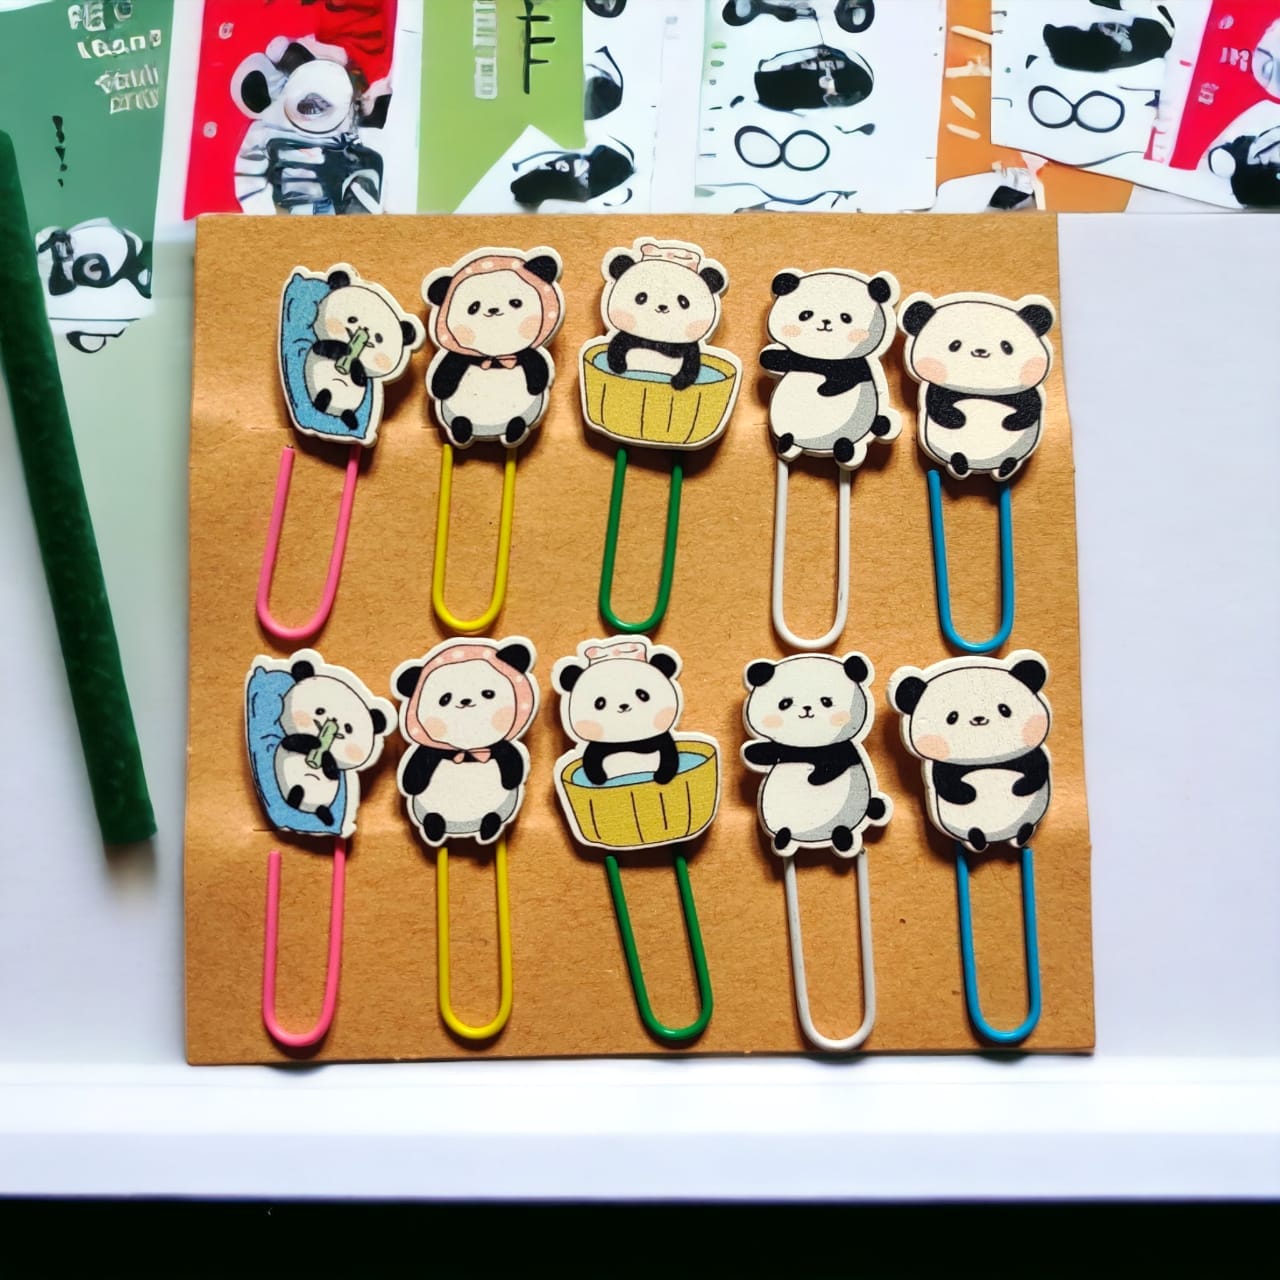 craftdev Mumbai branch MDF & wooden Crafts Cute Panda Wooden Clips - Pack of 10 clips - Organize, Decorate, and Craft with Natural Elegance